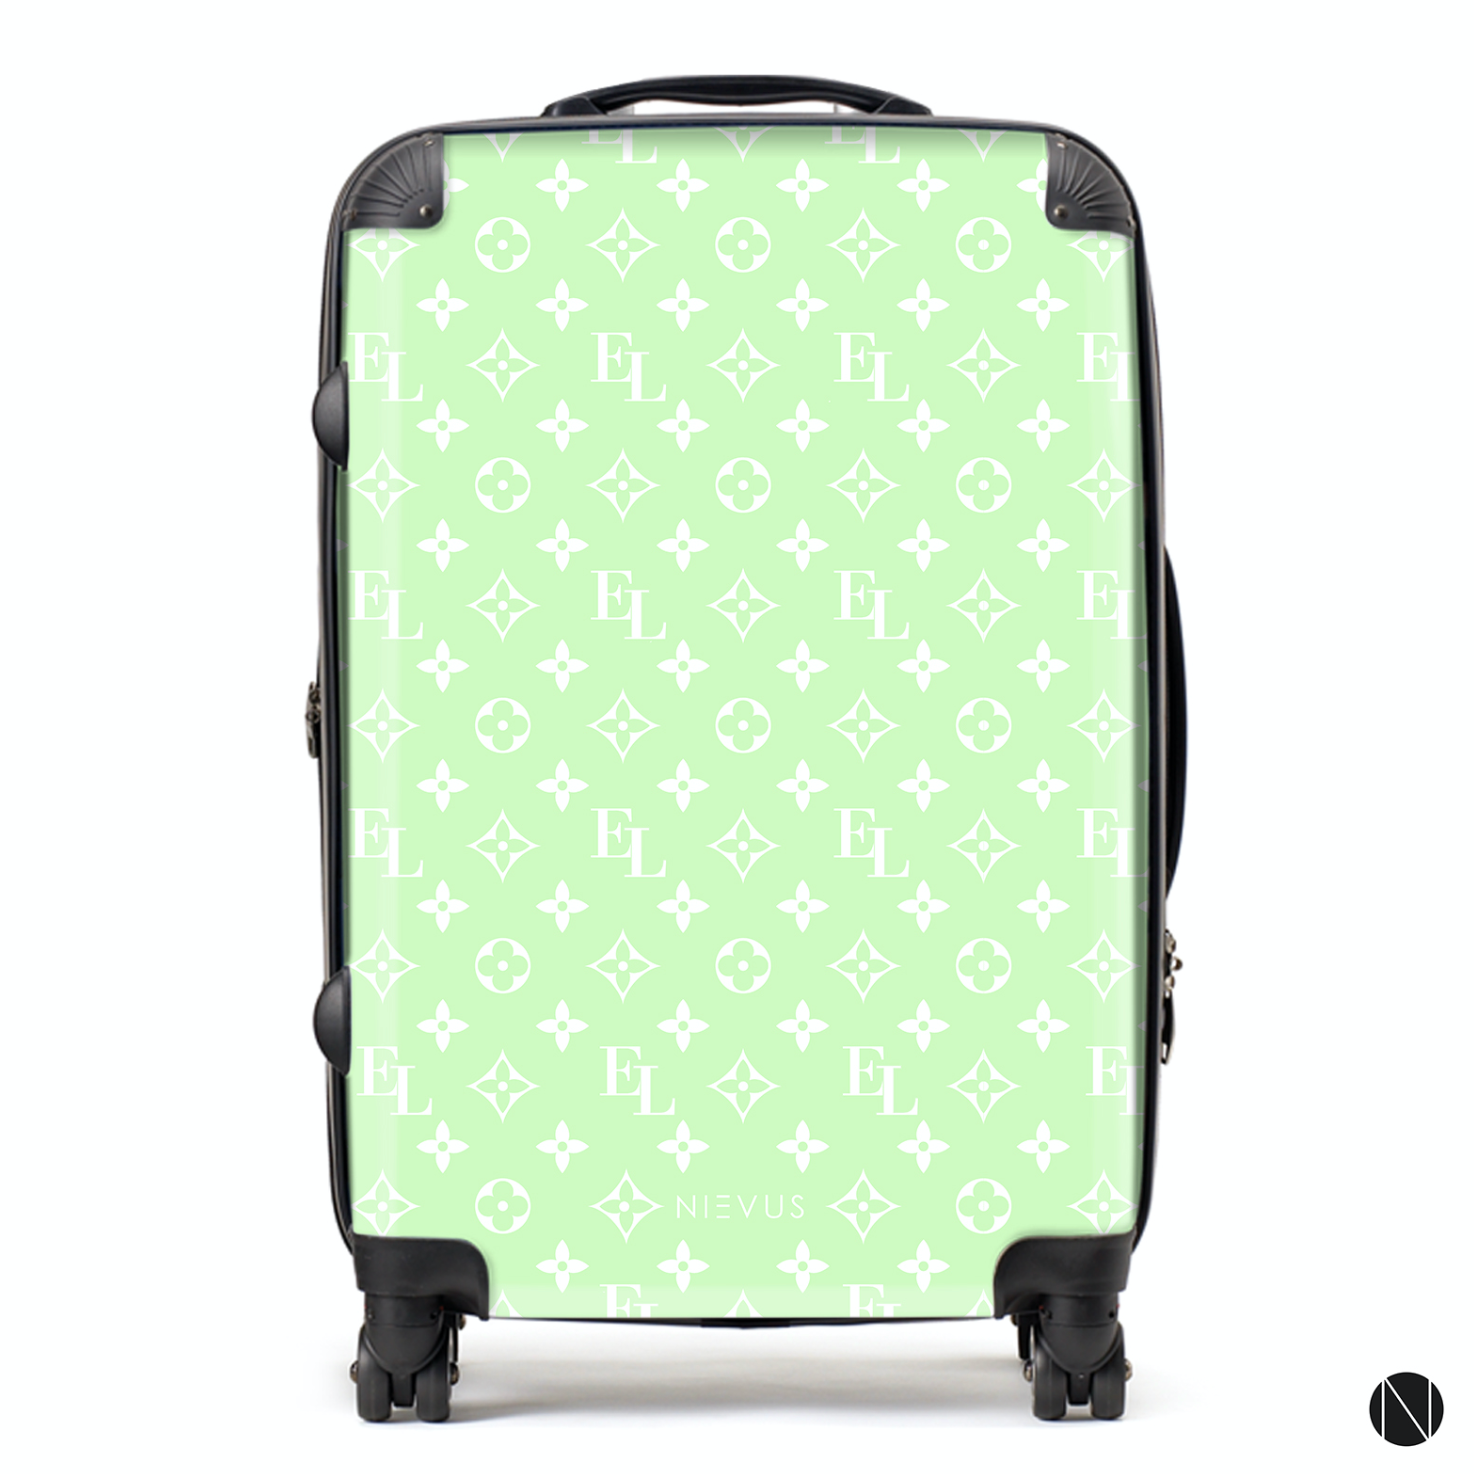 The Personalised Monogram Suitcase - Mint Edition